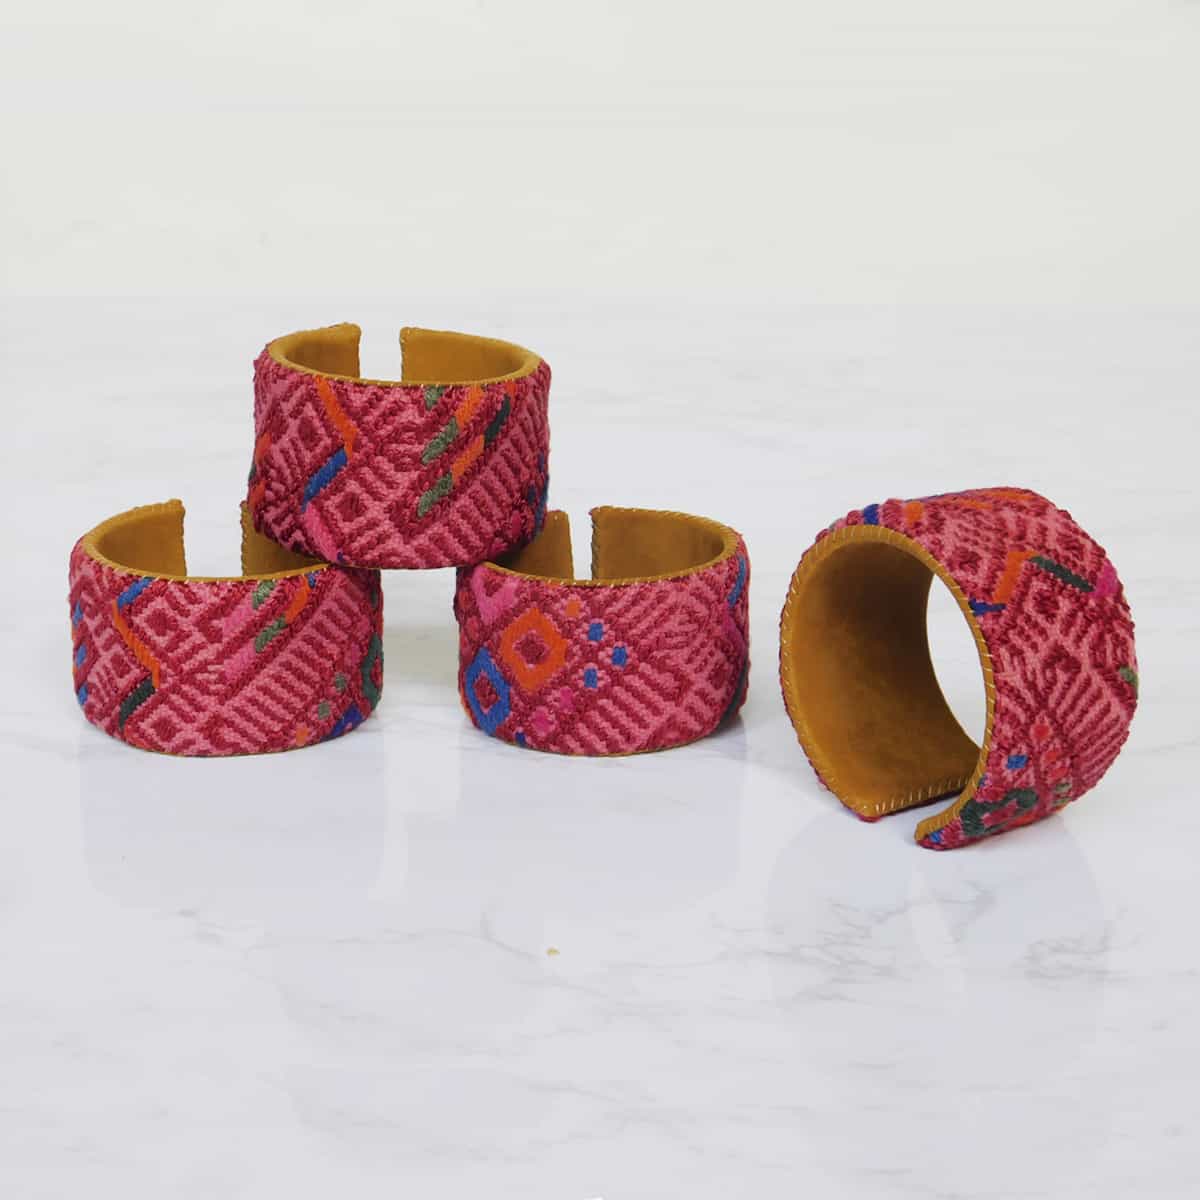 four red cuff bracelets made by hand in guatemala with red huipil fabric featuring diamond shapes